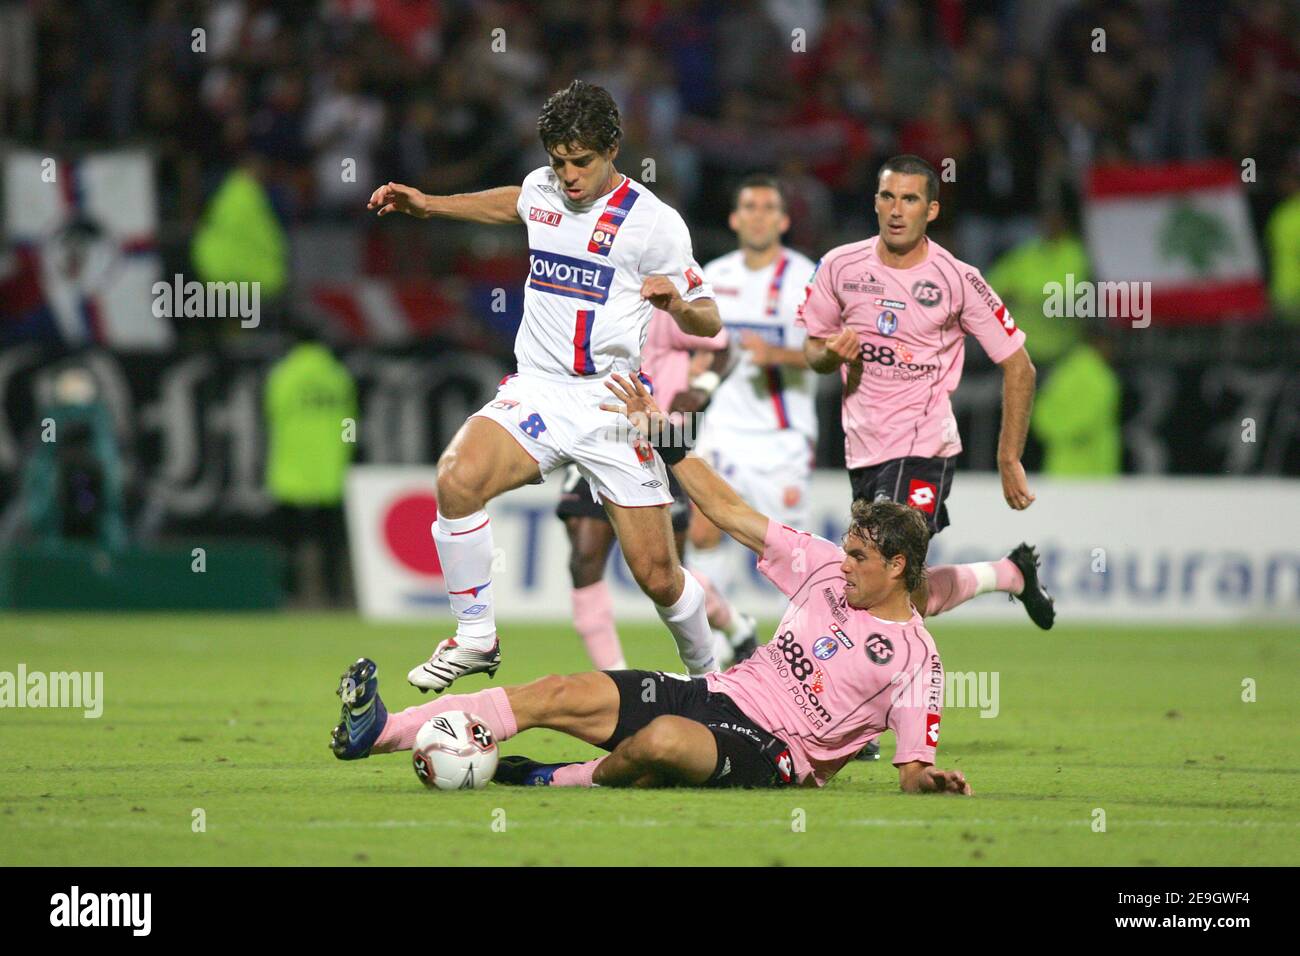 Lyon's Juninho and TFC's Johan Elmander battle for the ball during the Premier league football match Toulouse Football Club vs Olympique Lyonnais in Lyon, France, on August 12, 2006. The match ended in 1-1 draw. Photo by Manuel Blondeau/Cameleon/ABACAPRESS.COM Stock Photo